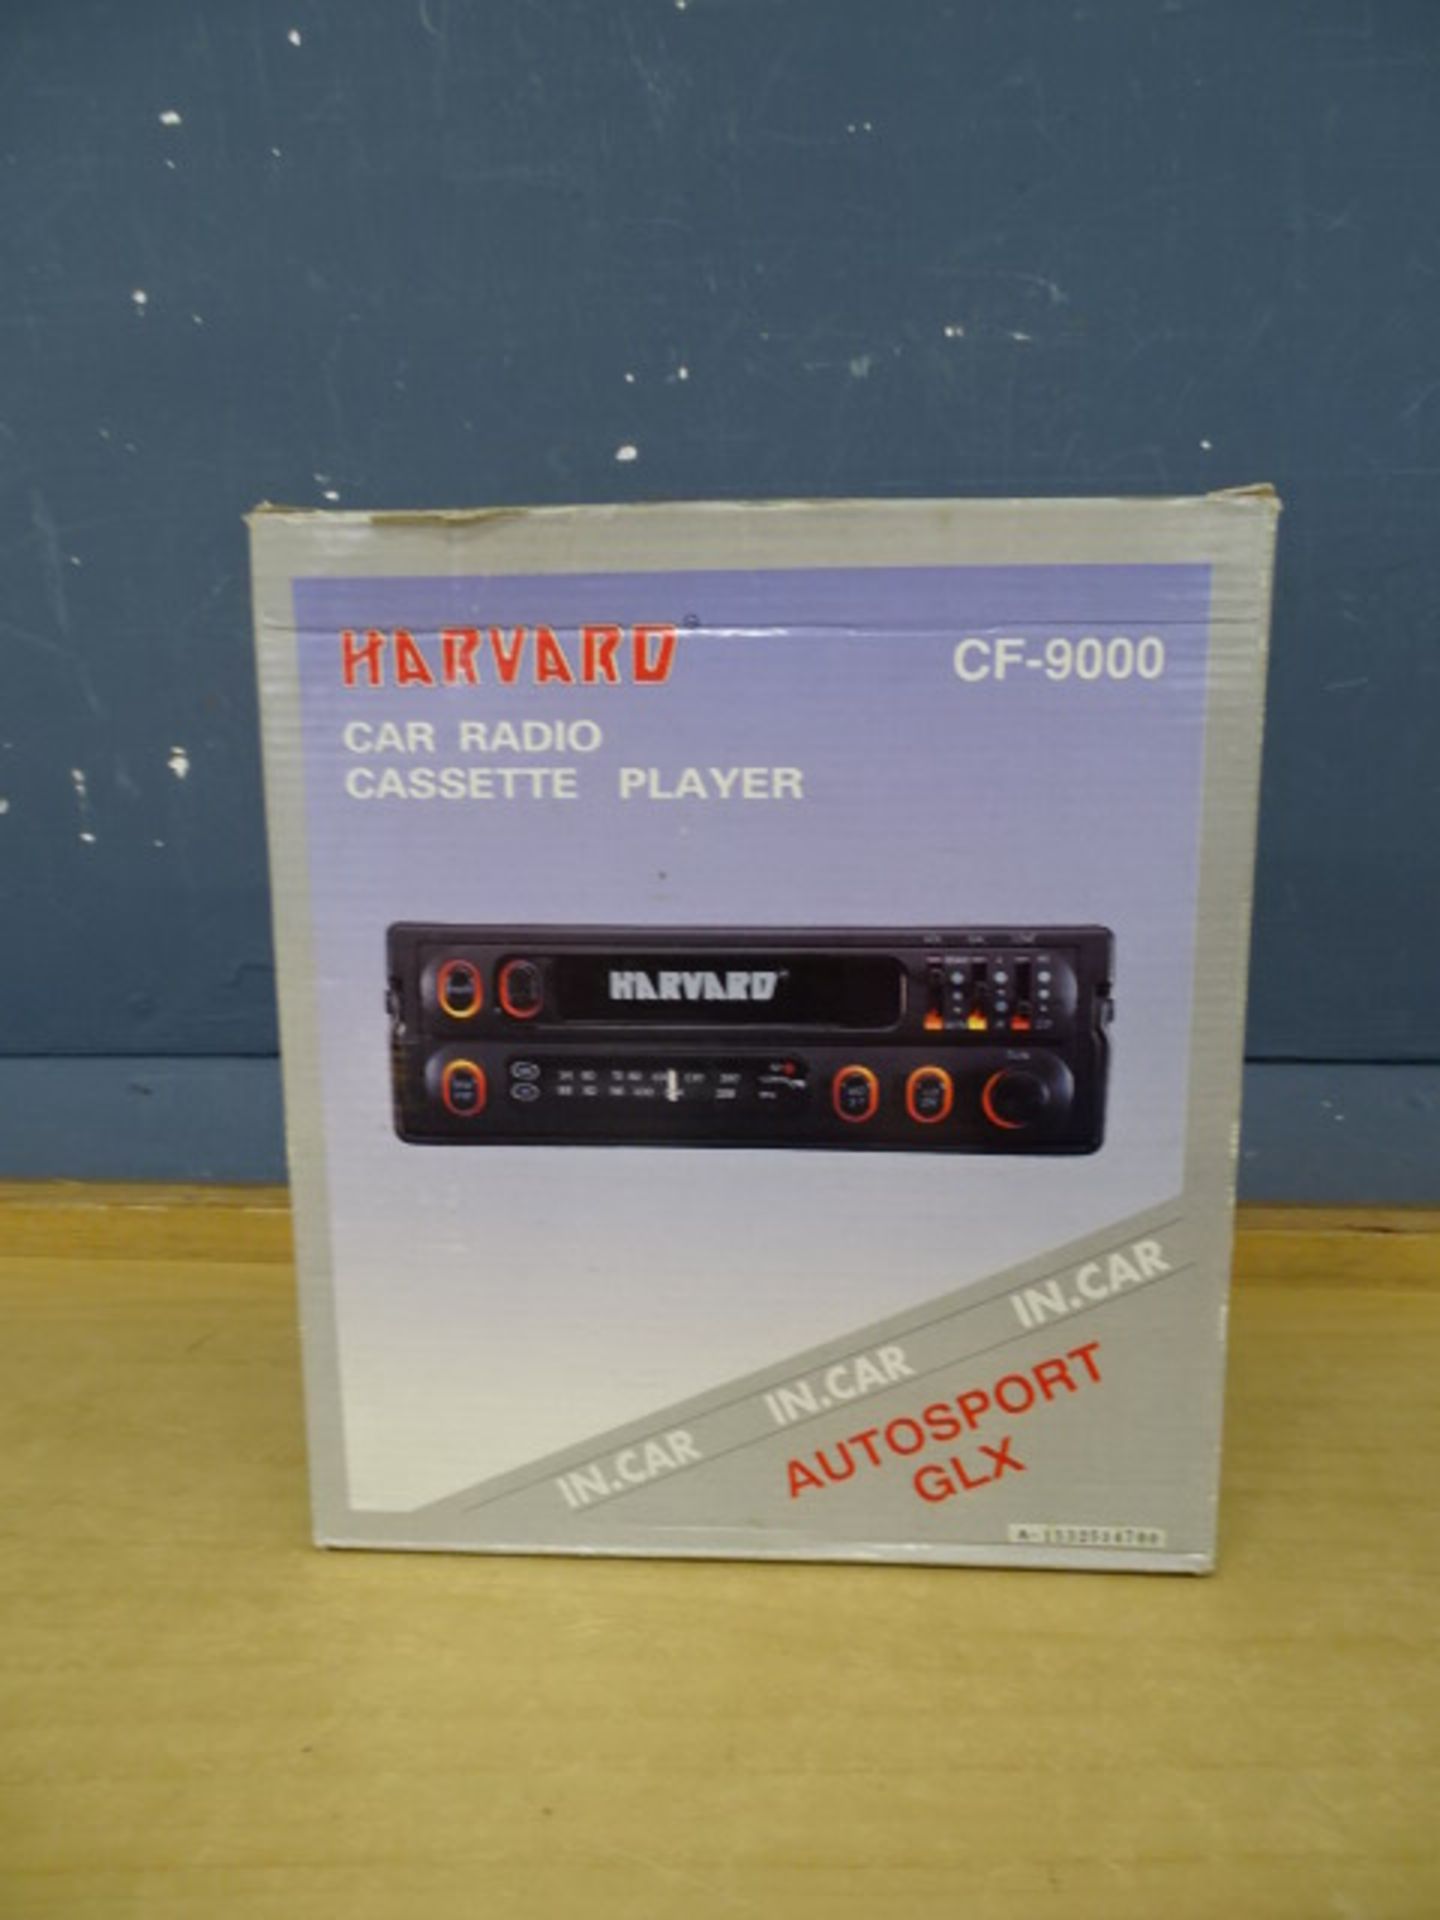 Boxed Harvard car radio cassette player and Olympus camera from a house clearance - Image 3 of 4